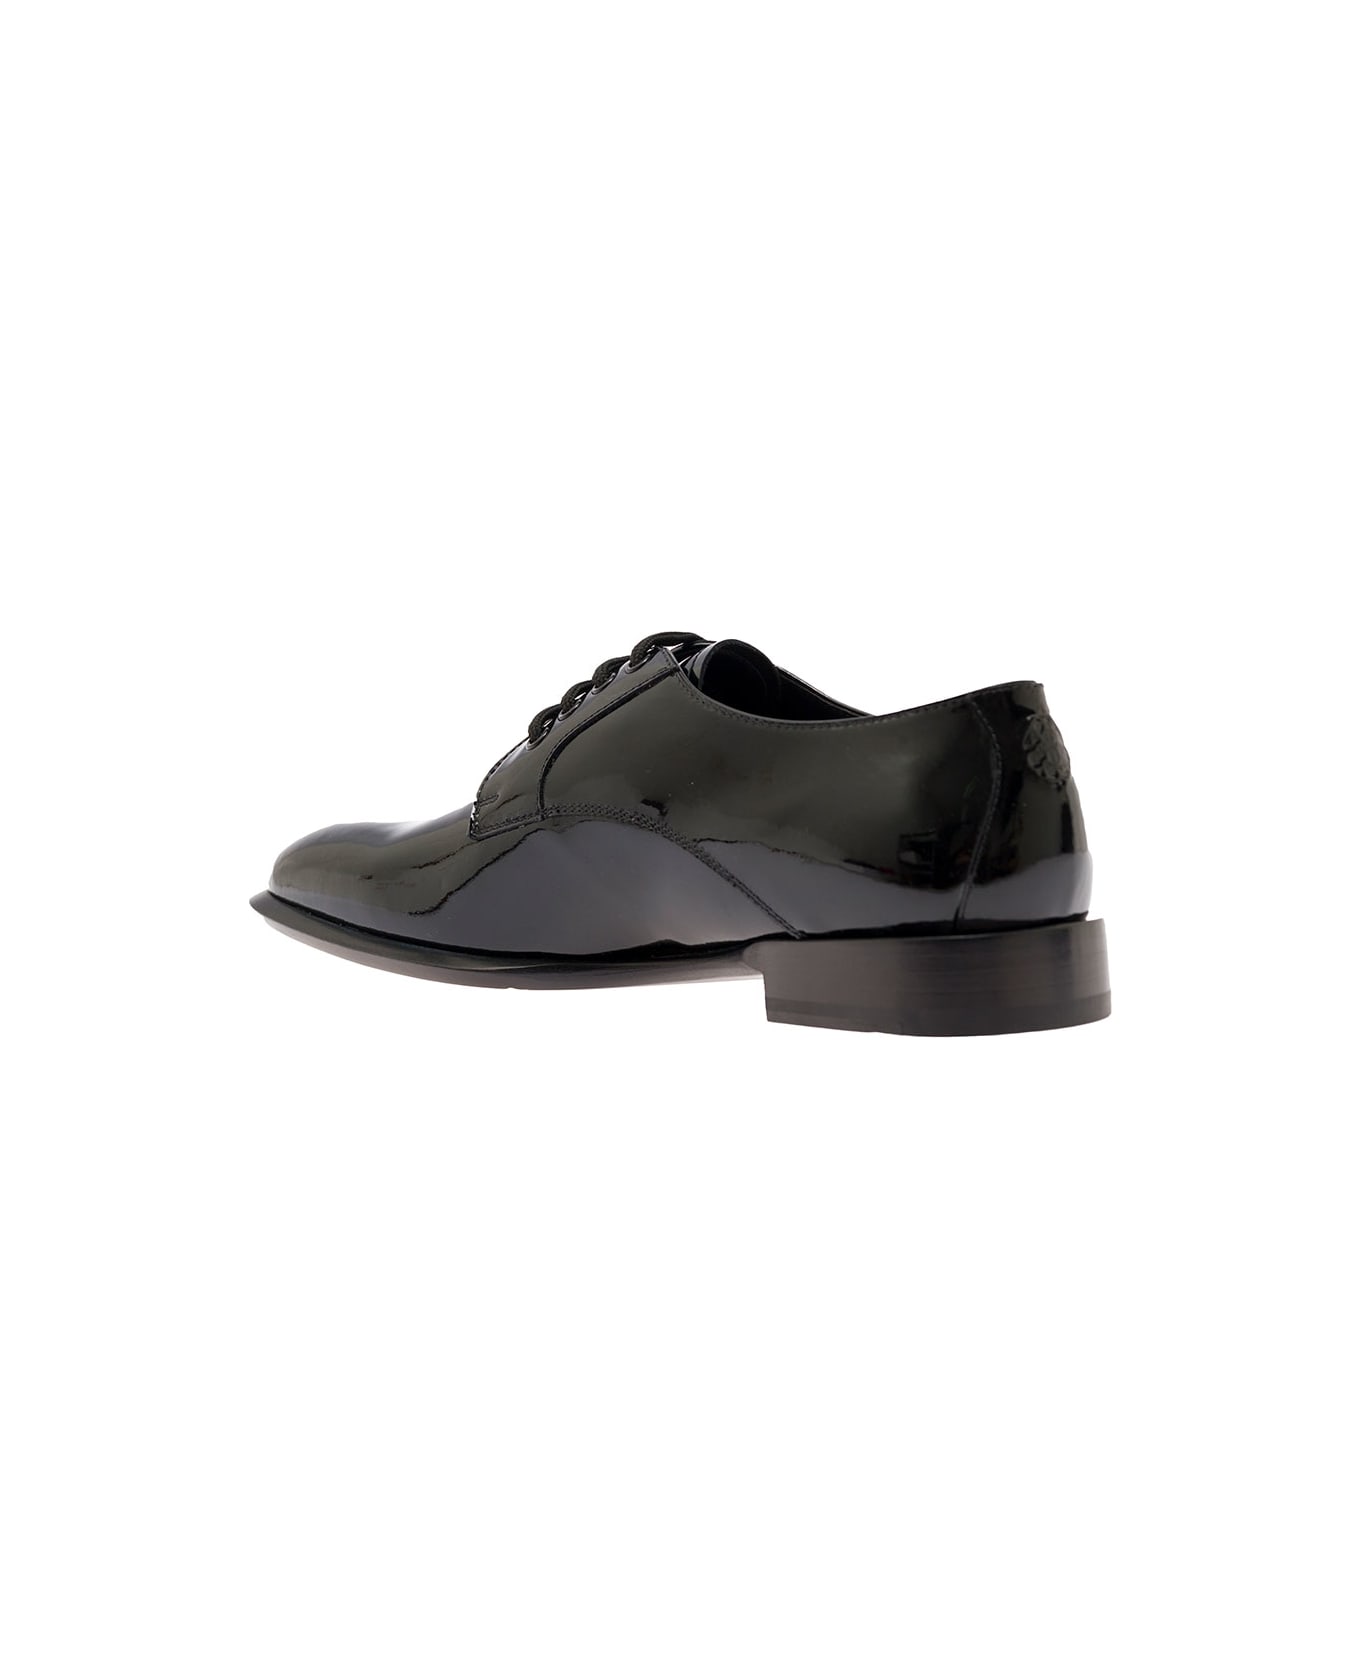 Alexander McQueen Black Oxford Shoes In Patent Leather Man - Black